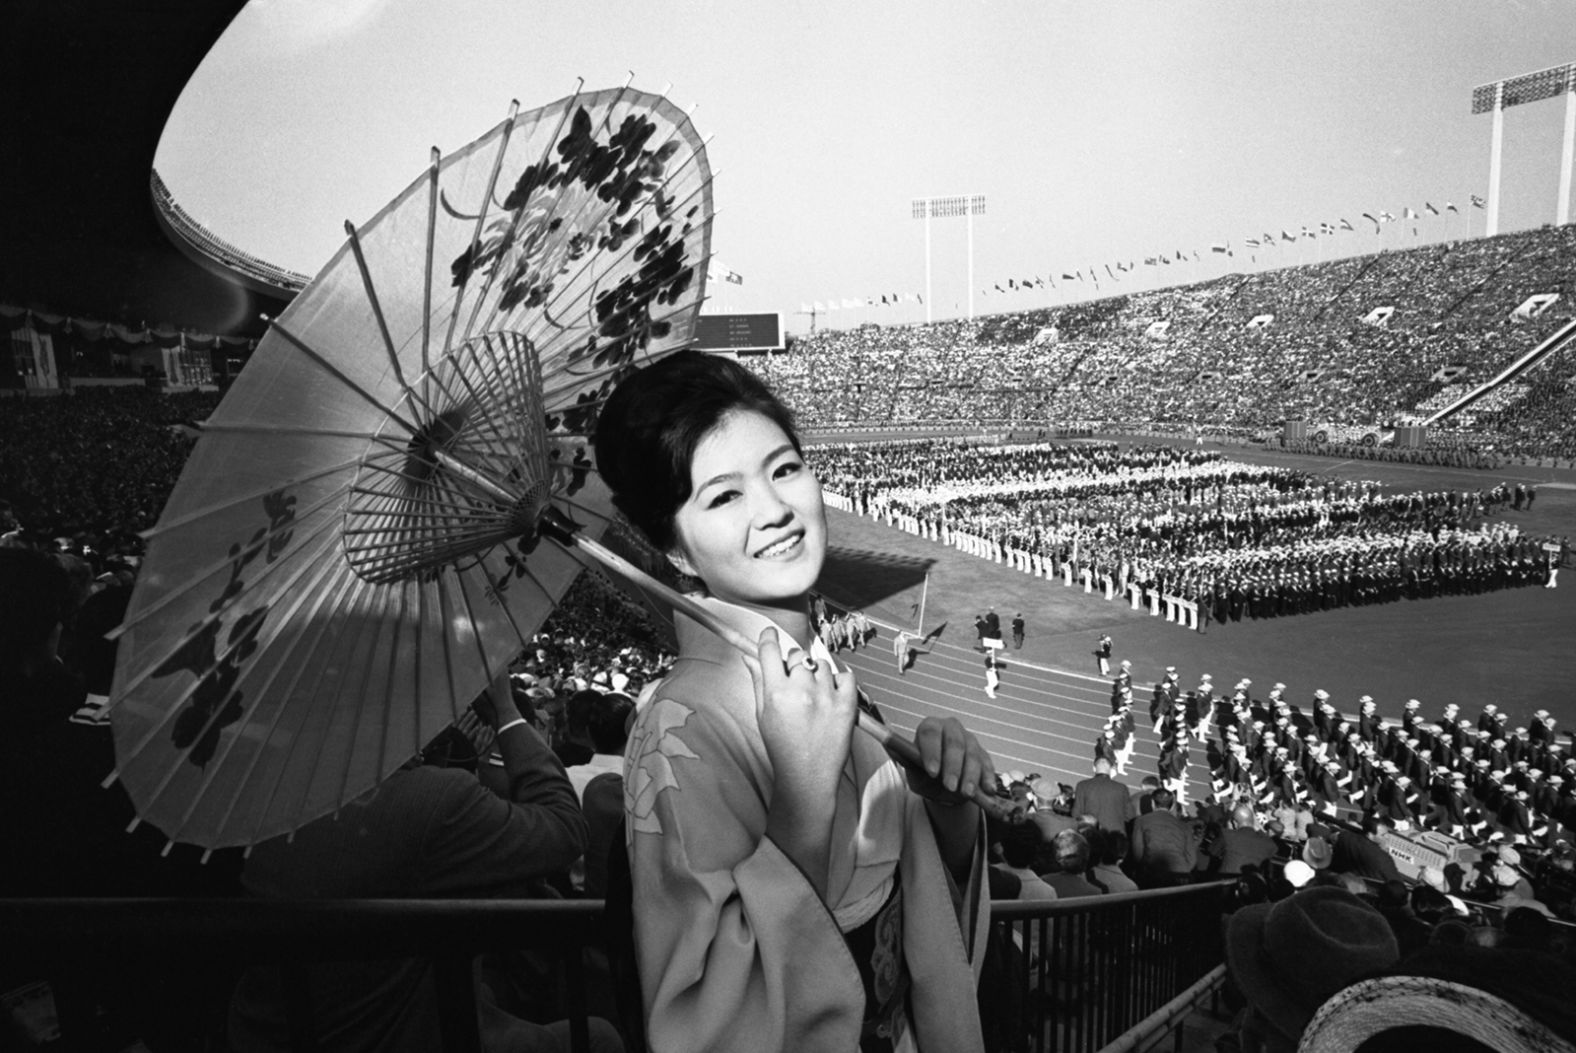 A woman wears traditional clothing at the opening ceremony on October 10, 1964.